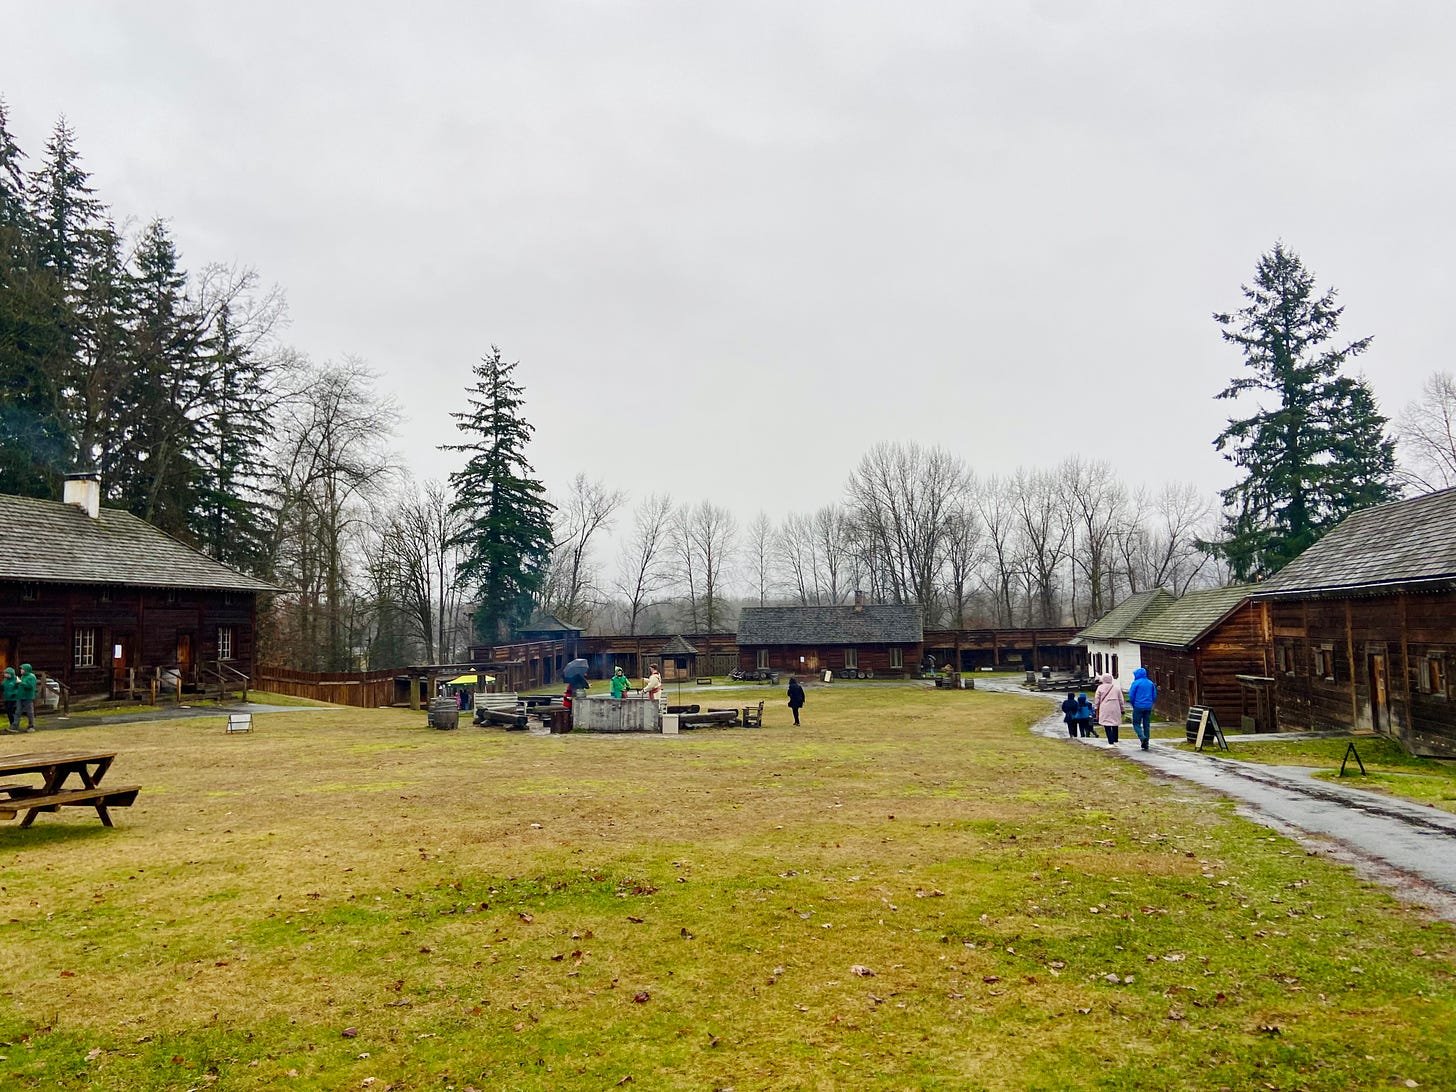 large grassy area with fire pit surrounded by colonial buildings at Fort Langley